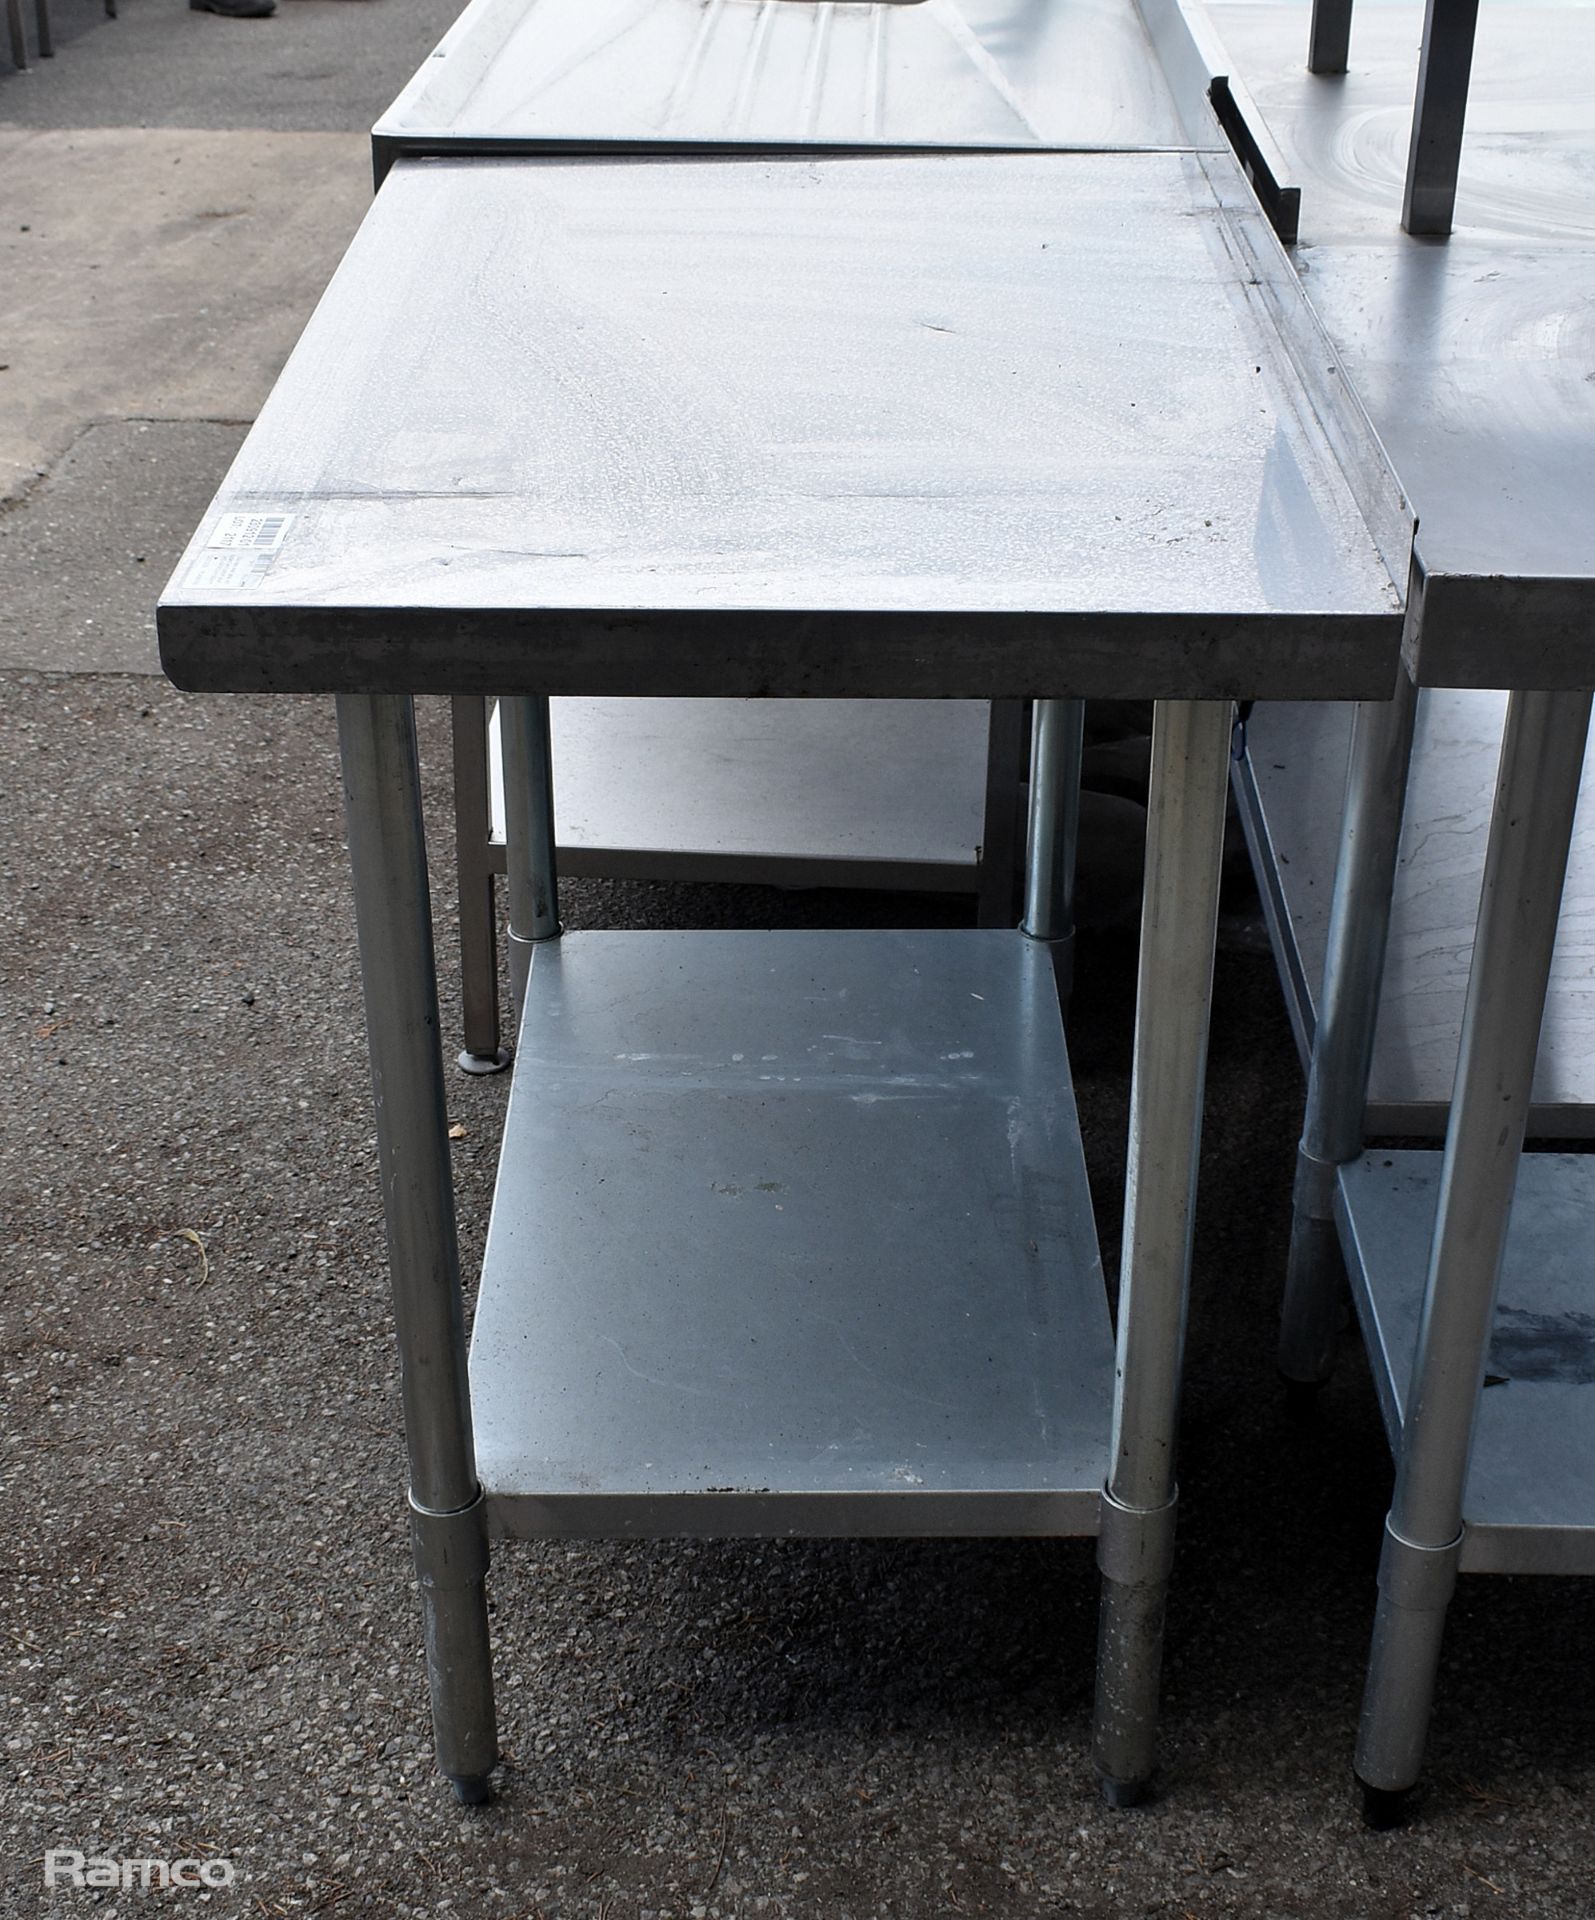 Stainless steel table with upstand and bottom shelf - L 915 x W 610 x H 930mm - Image 3 of 3